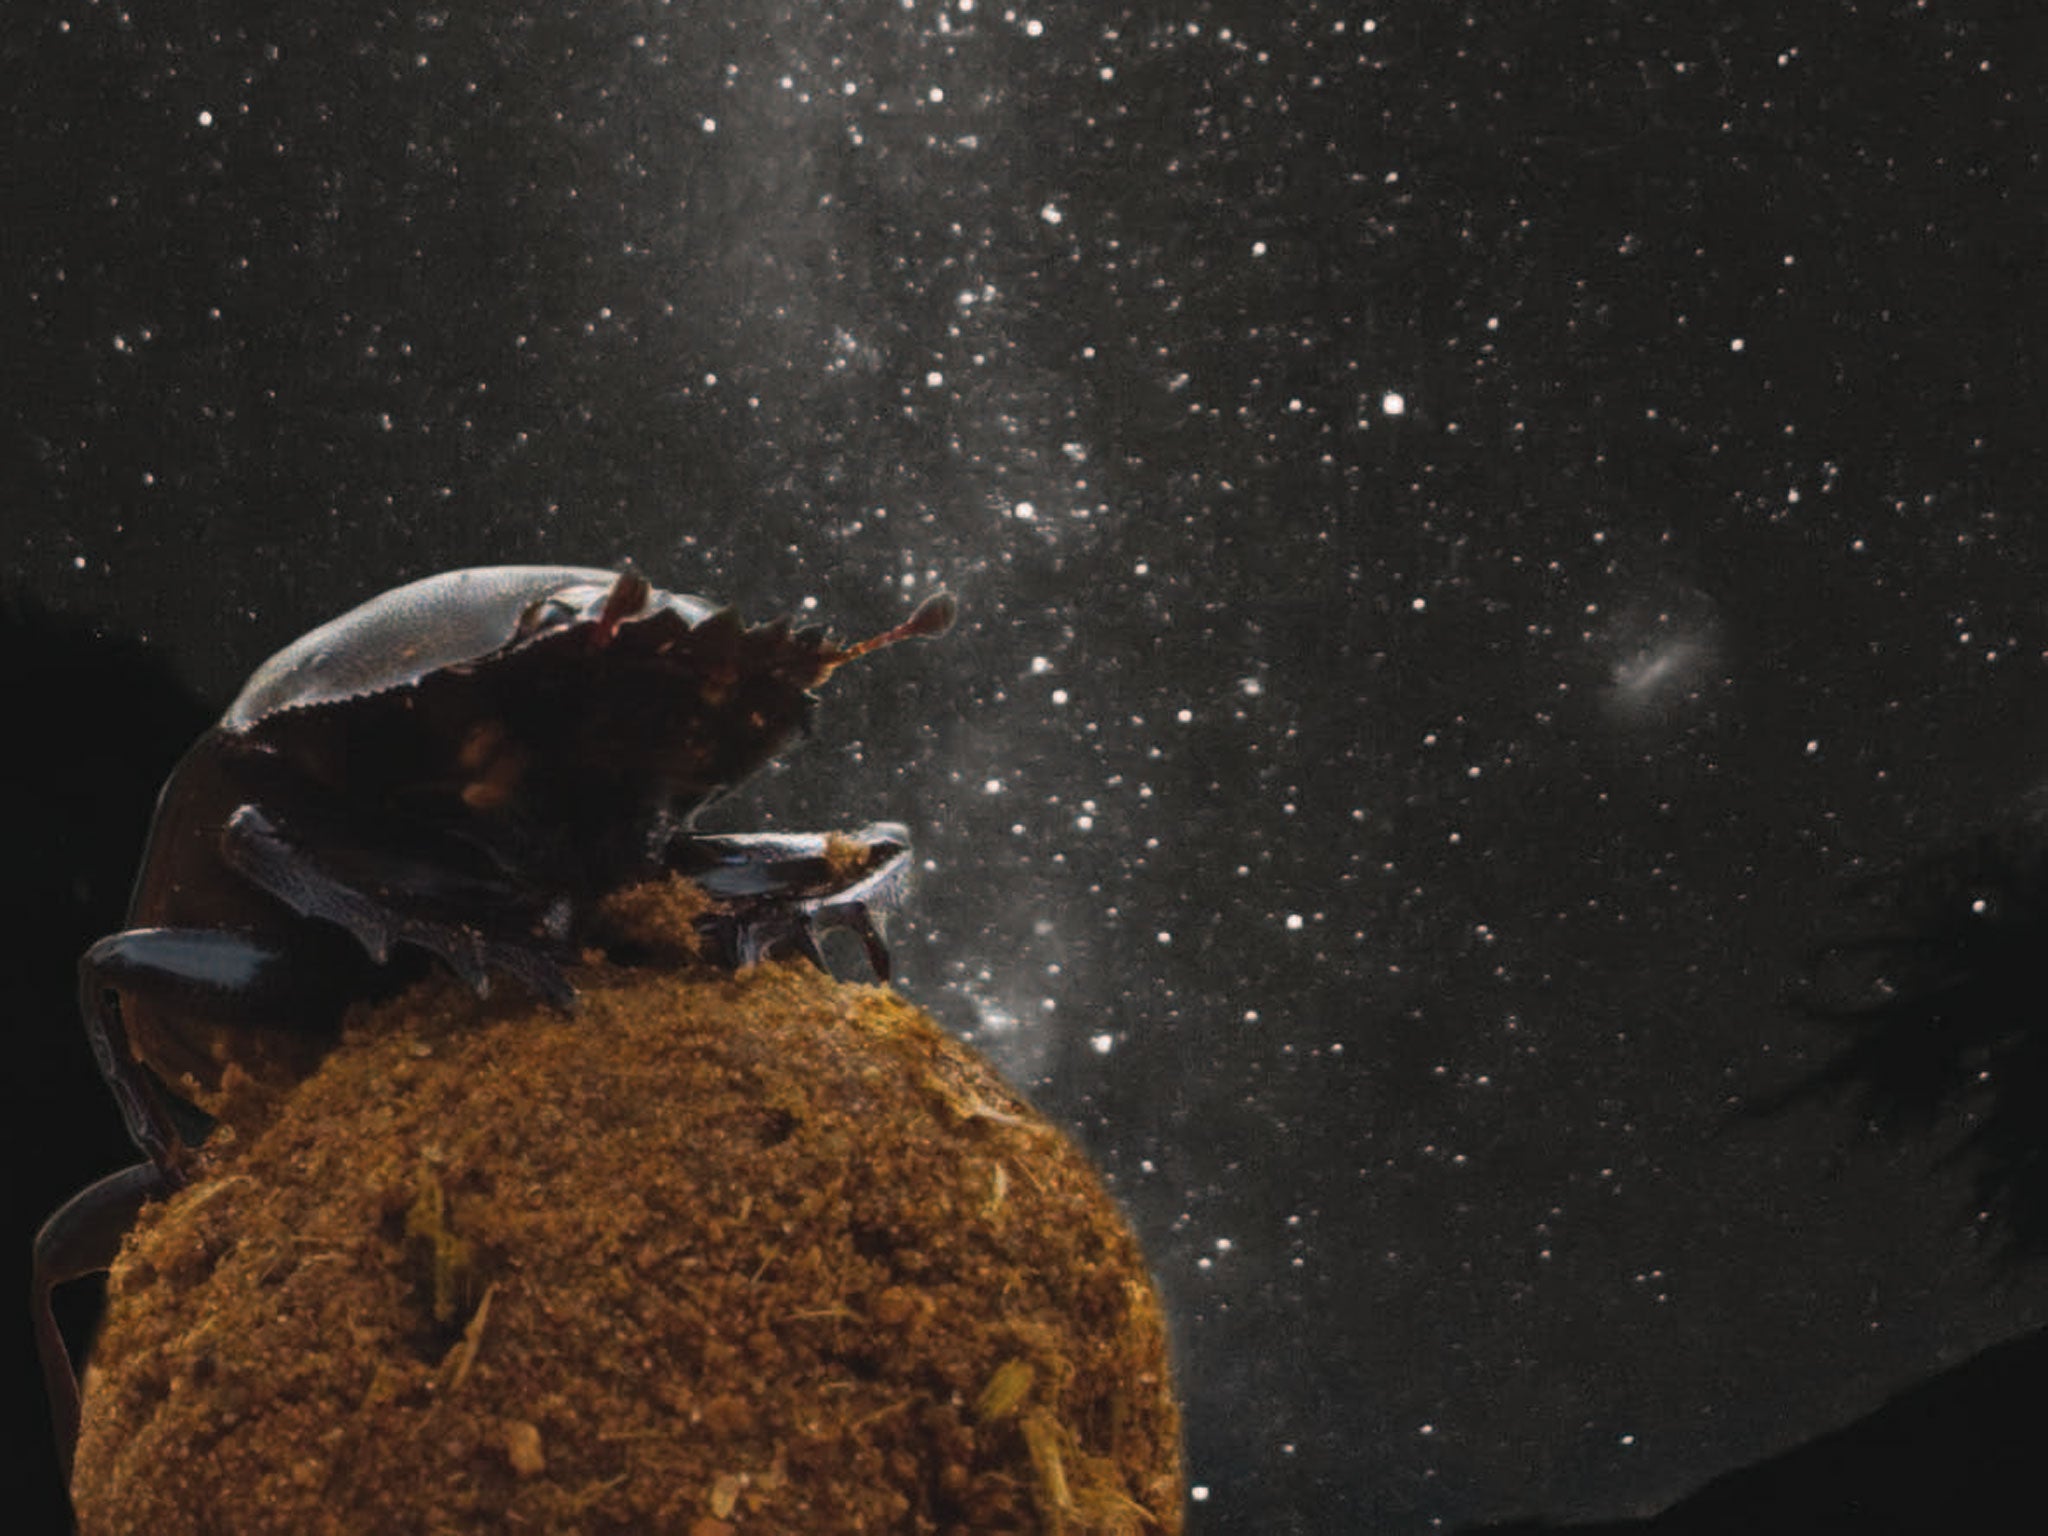 Dung beetles navigate by the light of the Milky Way